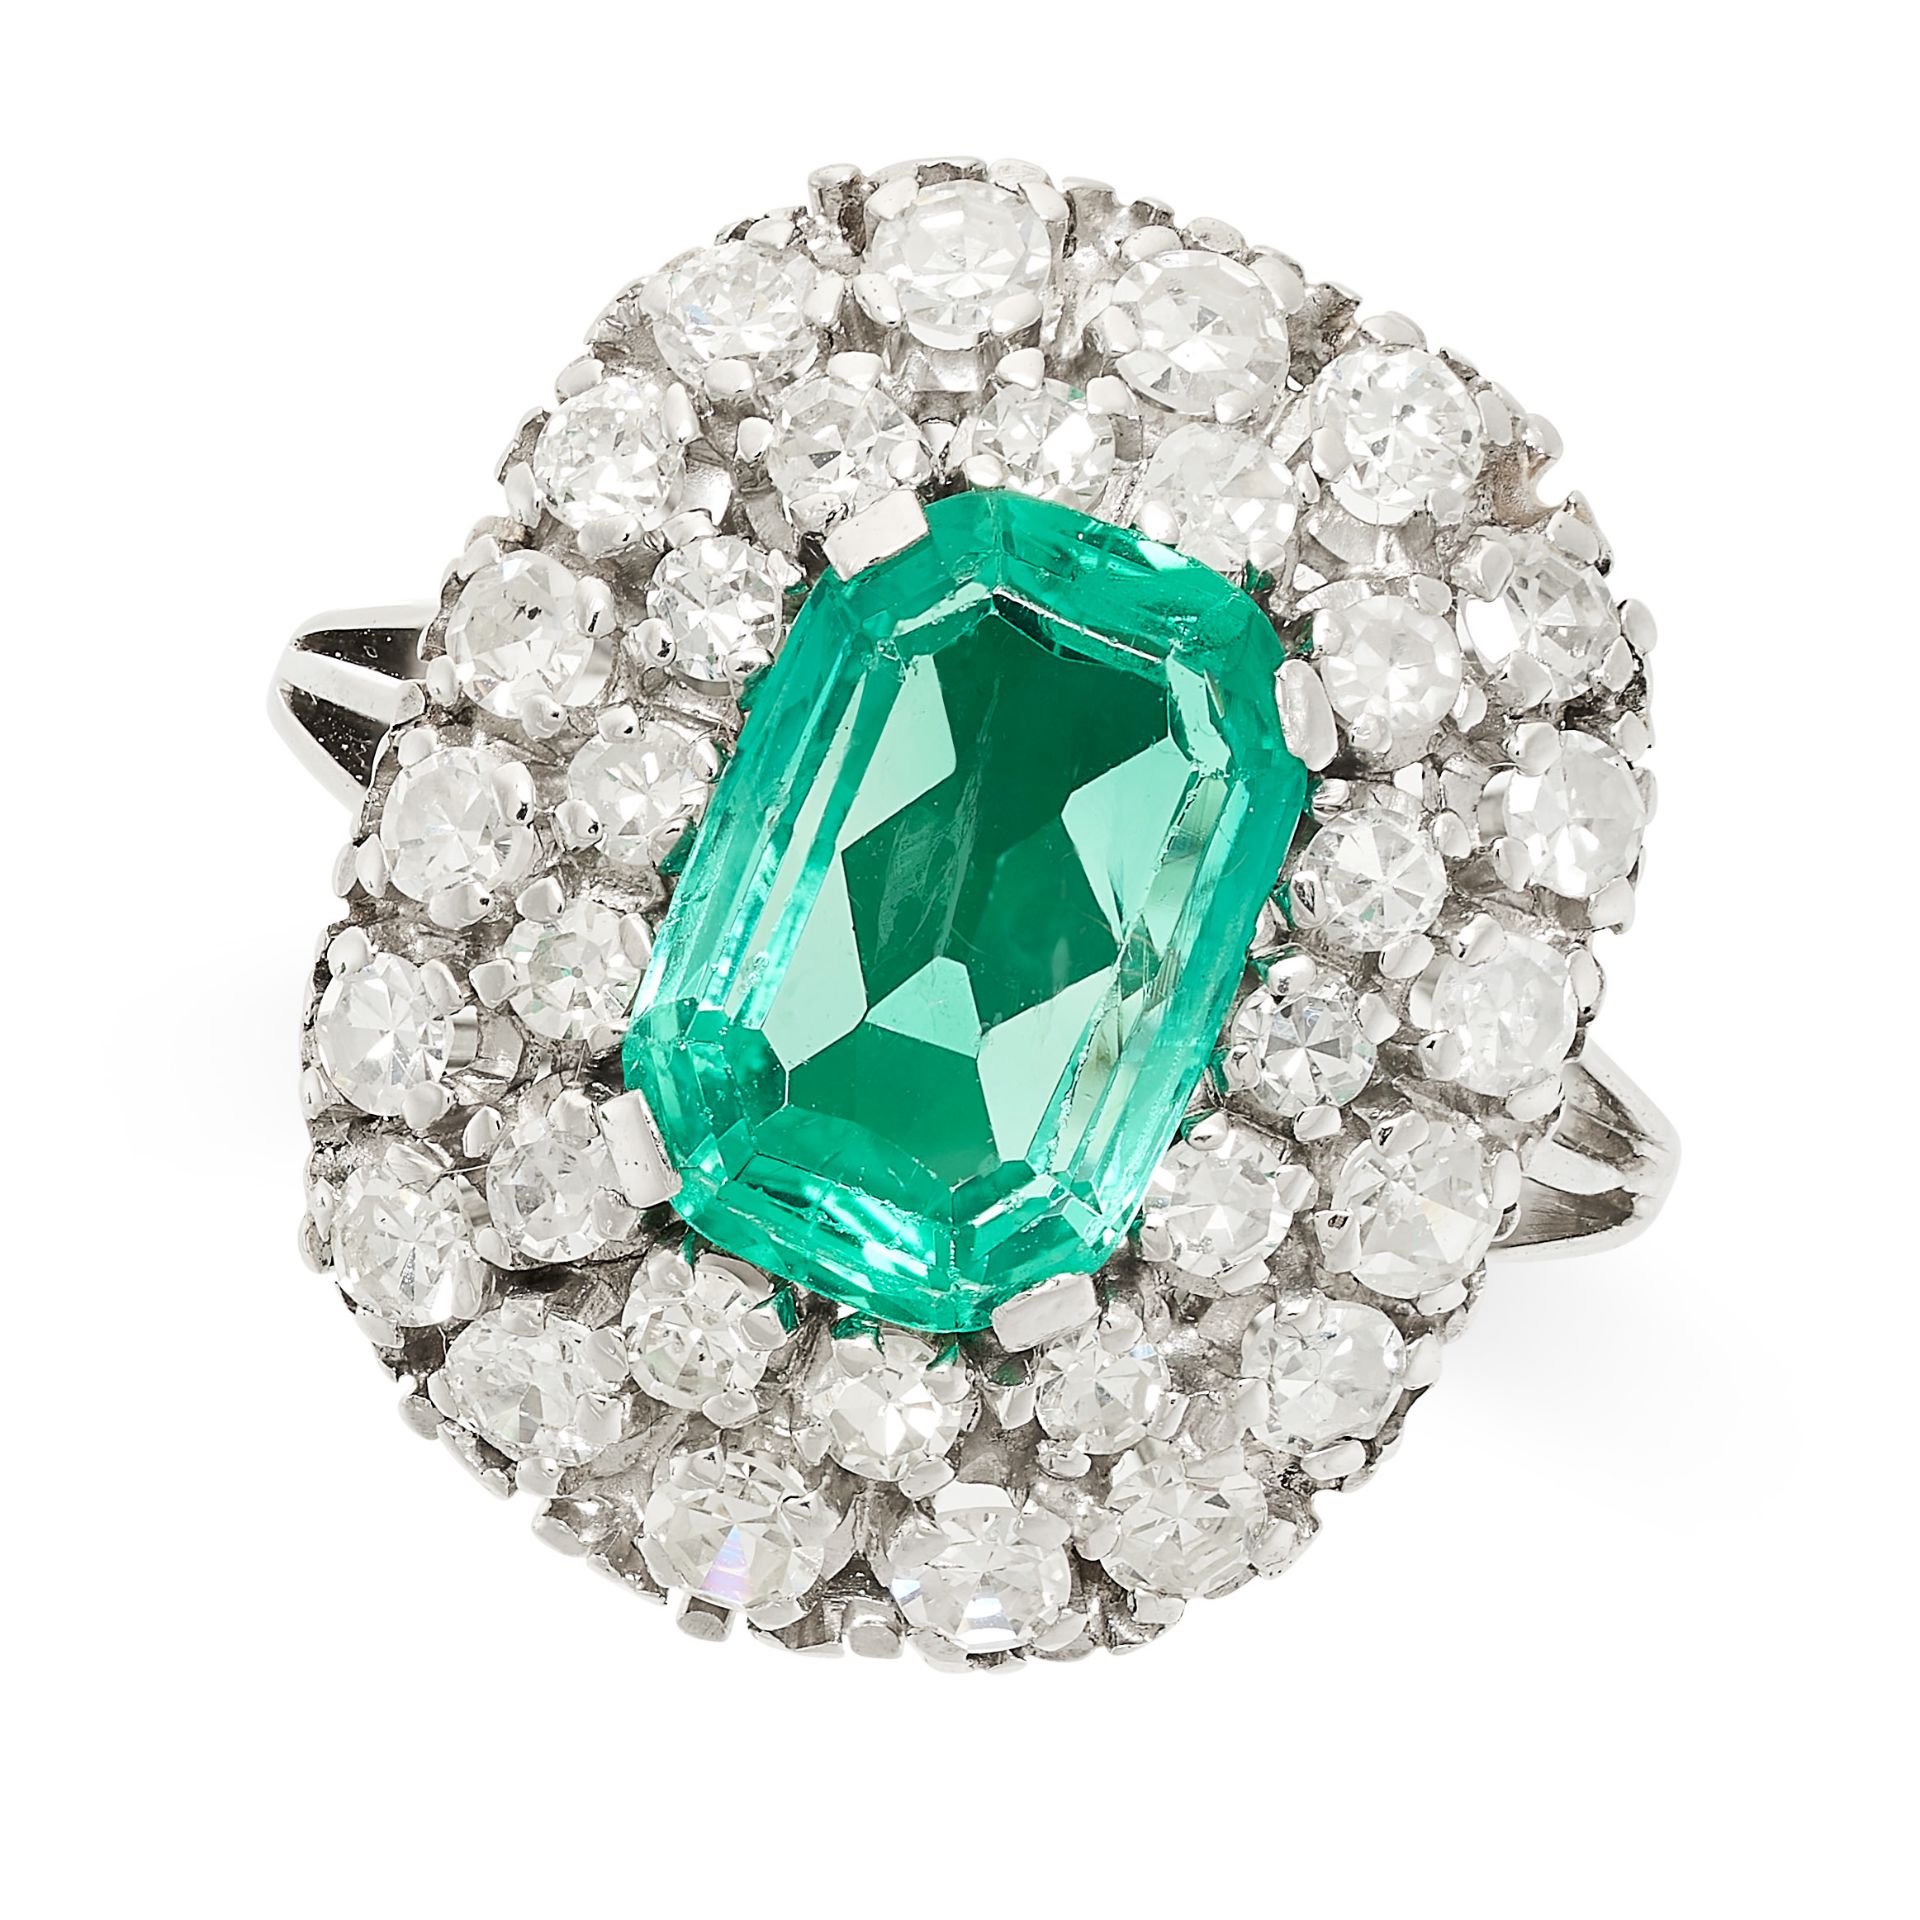 A COLOMBIAN EMERALD AND DIAMOND RING in 14ct white gold, set with an octagonal step cut emerald of